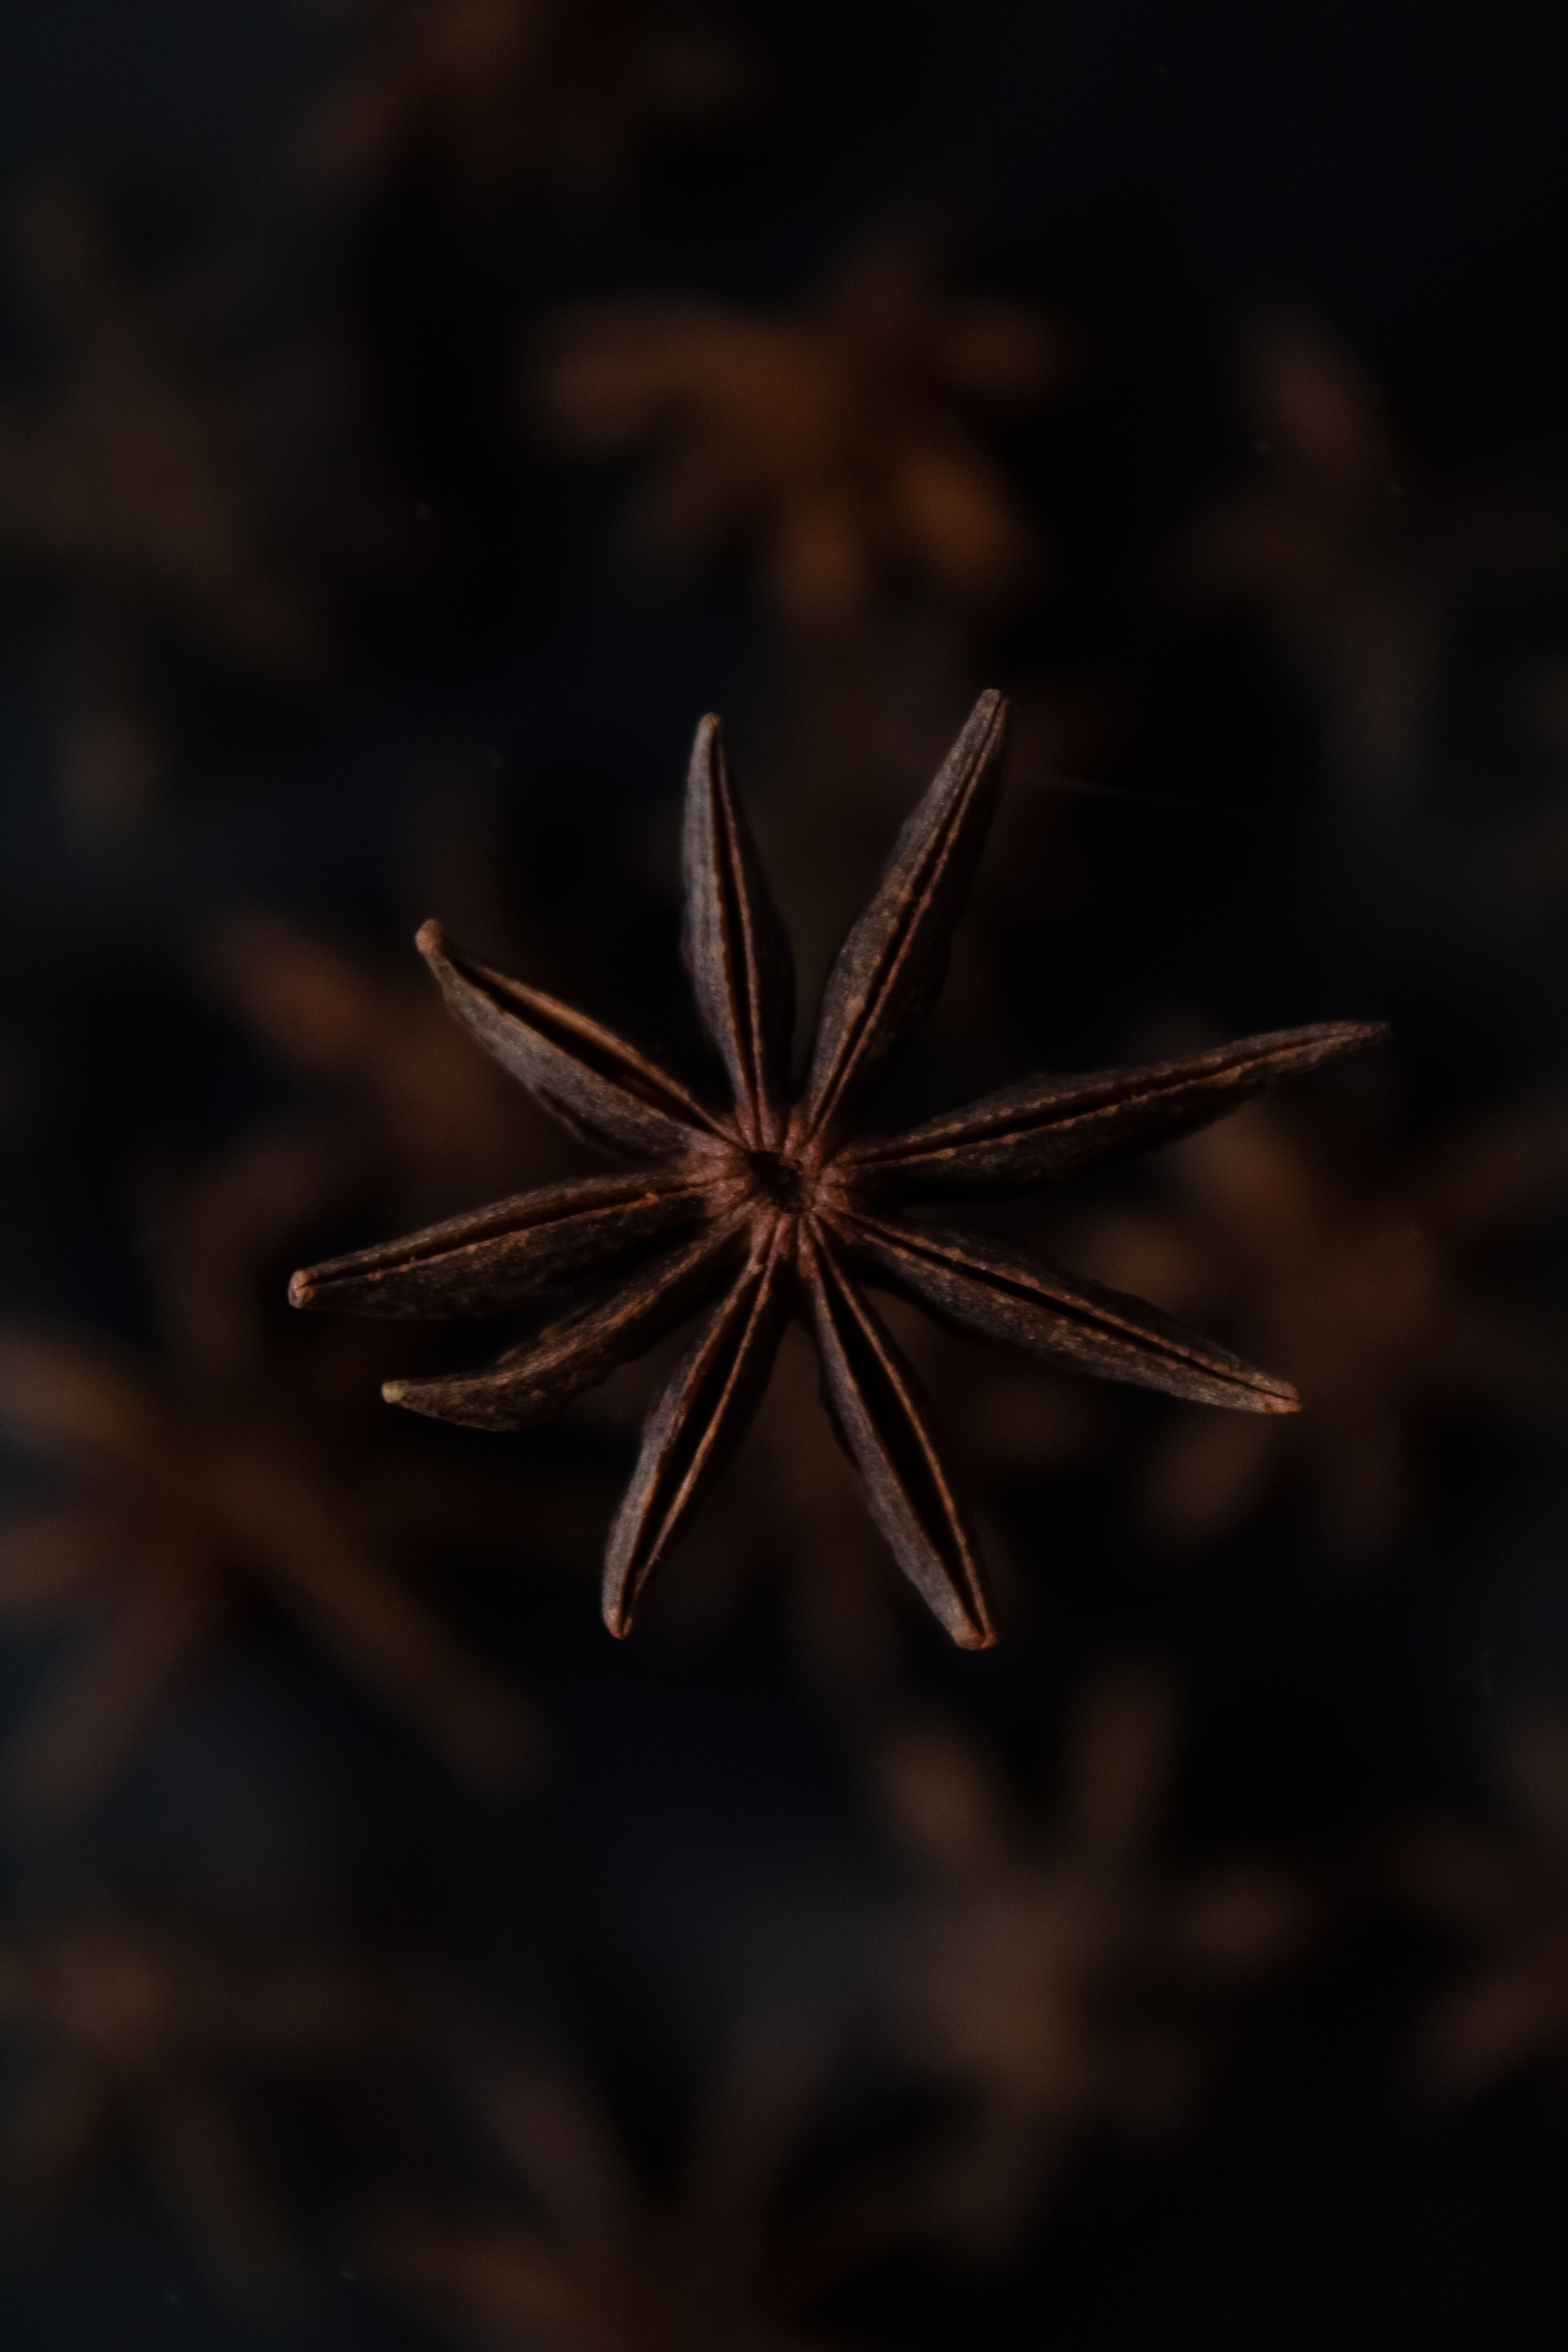 143395 download wallpaper cinnamon, macro, brown, focus, spice screensavers and pictures for free